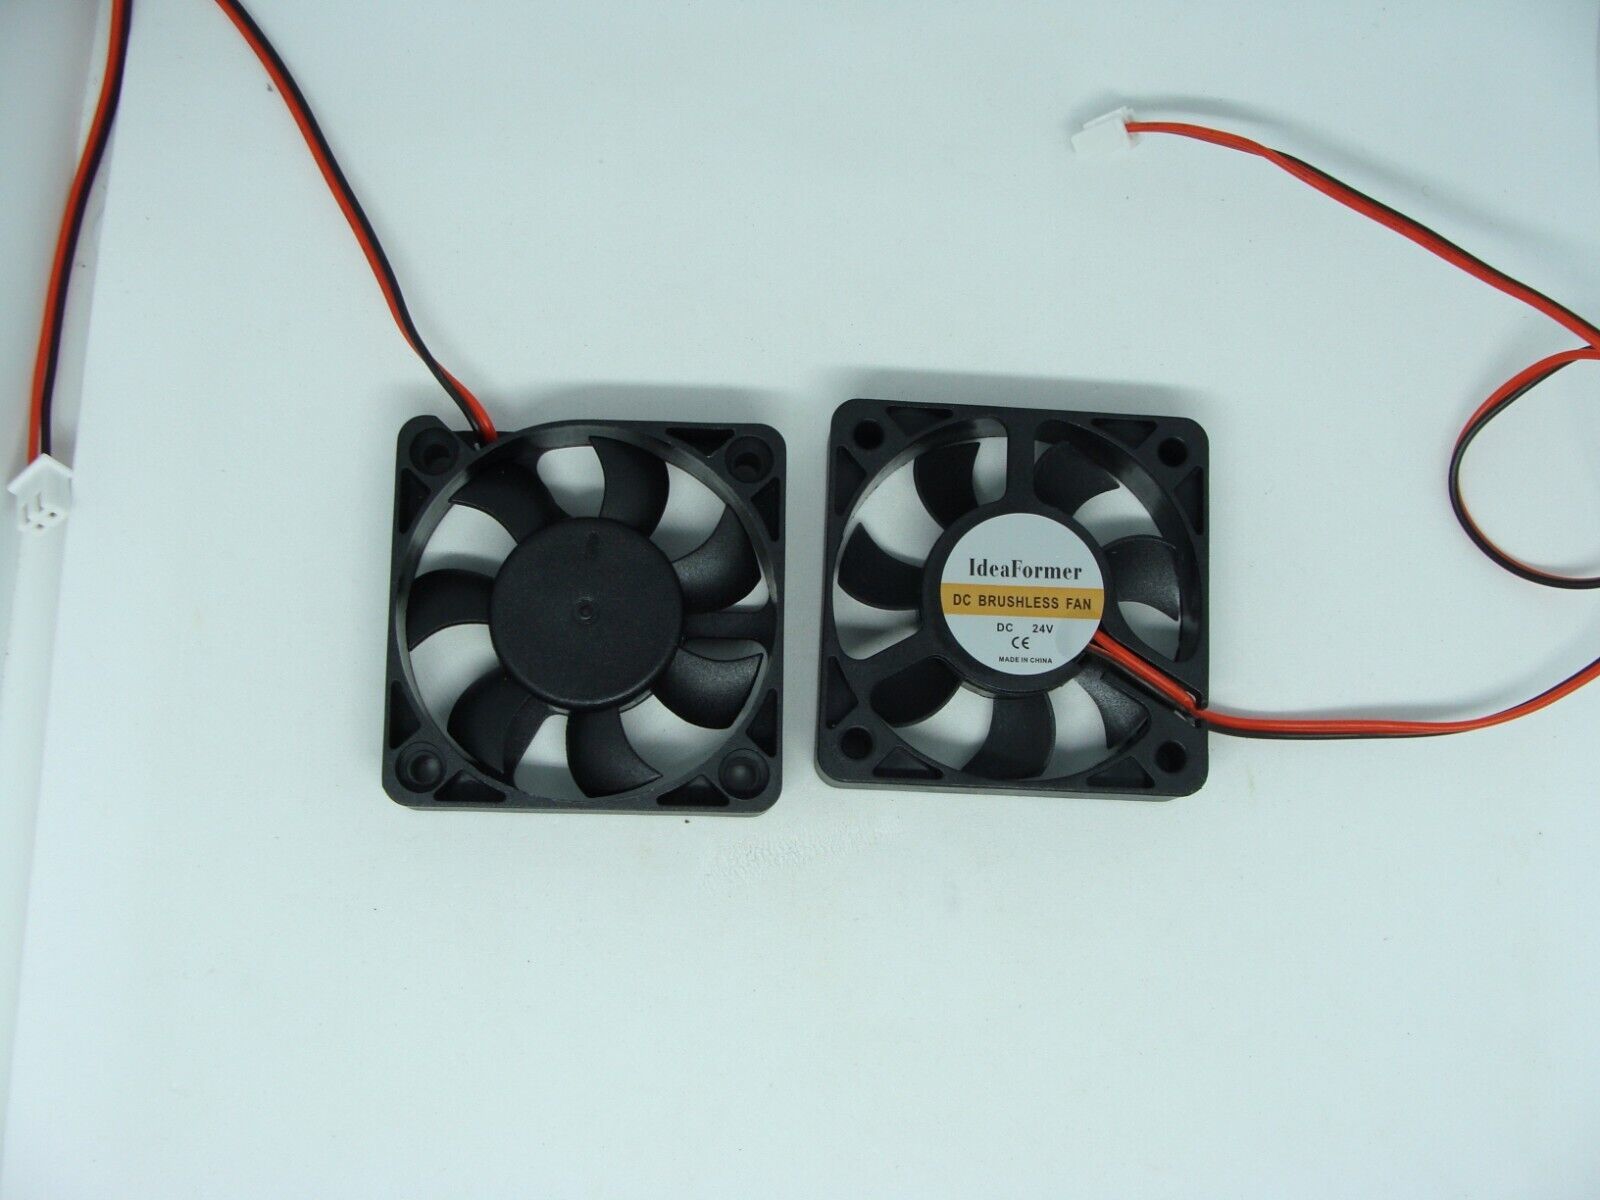 Primary image for 2Pc Pack Lot DC Brushless Cool Fan Blower 3D Printer CNC Machine - 5050 24V 50mm